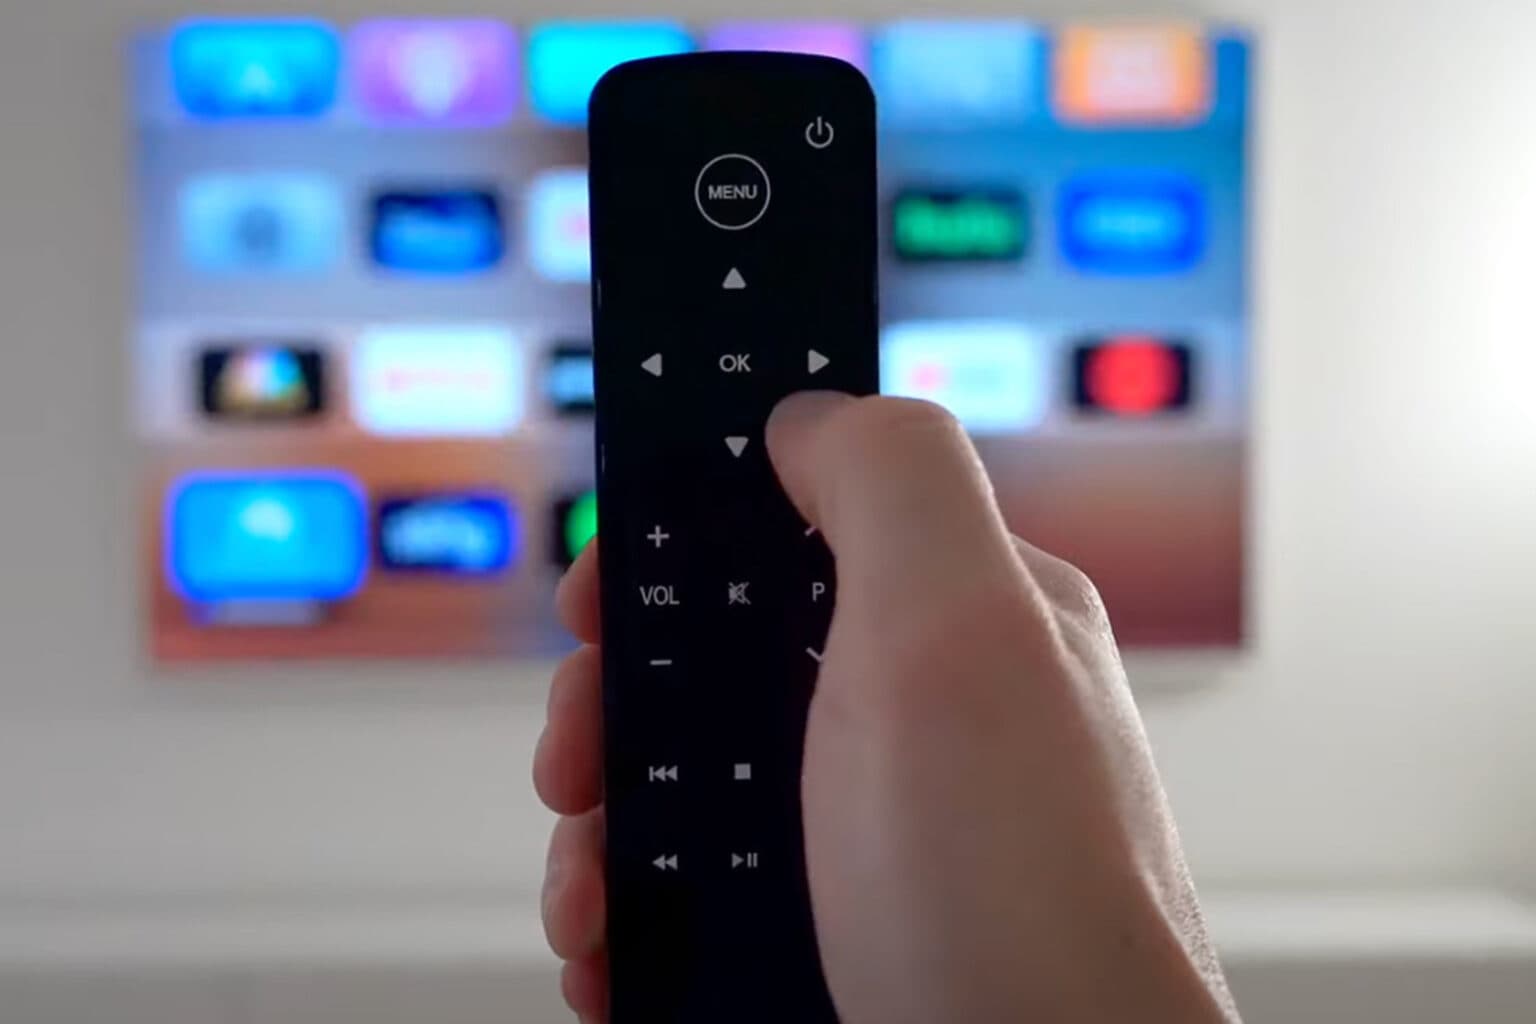 Enjoy a more intuitive Apple TV experience with this button remote, now only $39.99.